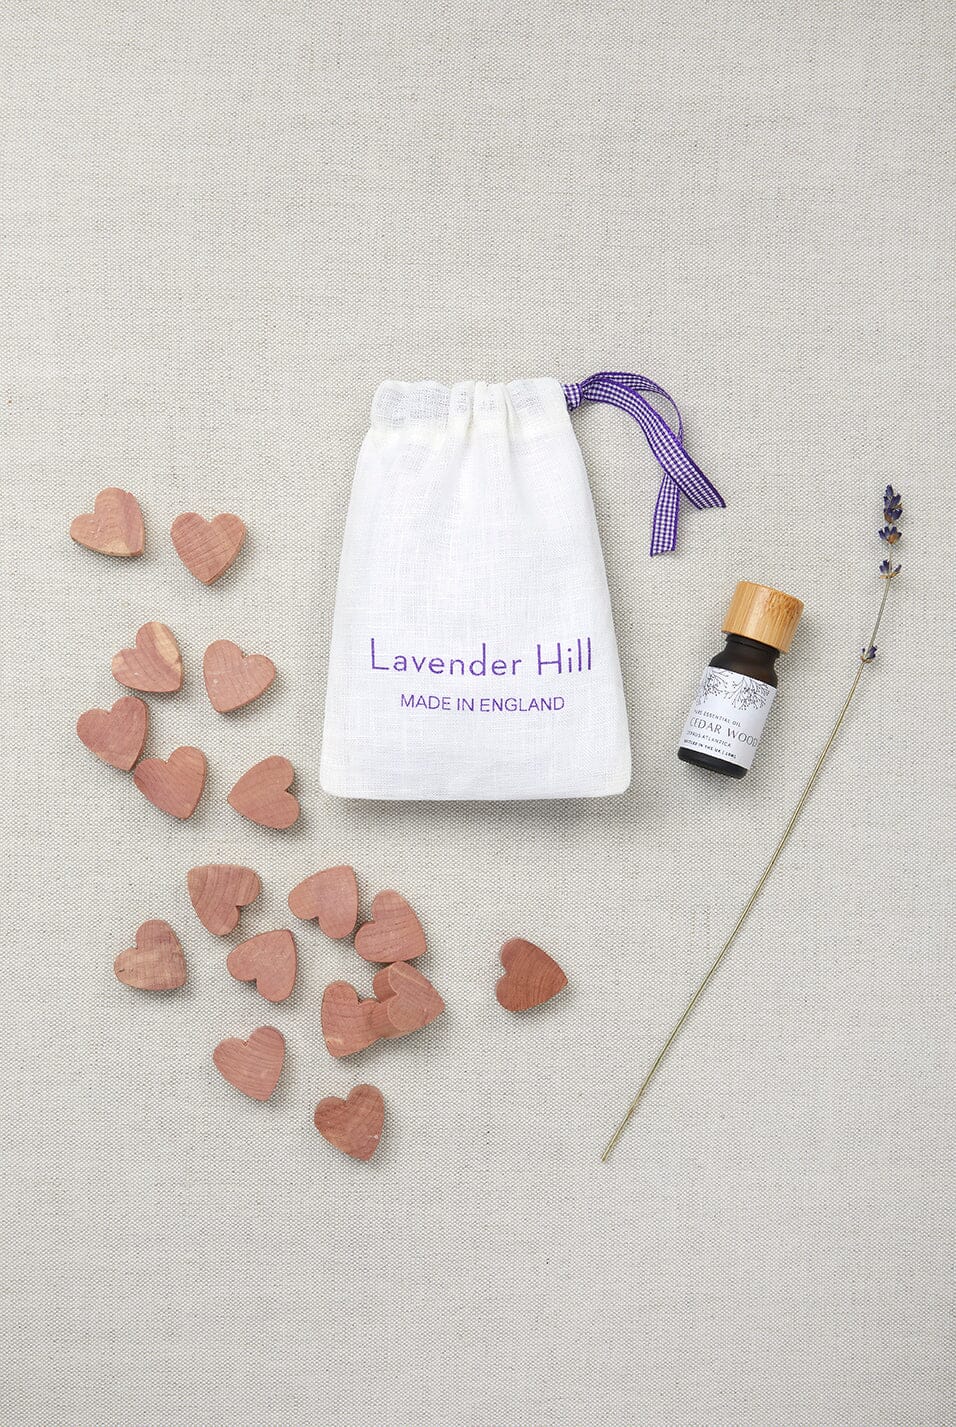 How To Get Rid Of Moths At Home – Lavender Hill Clothing